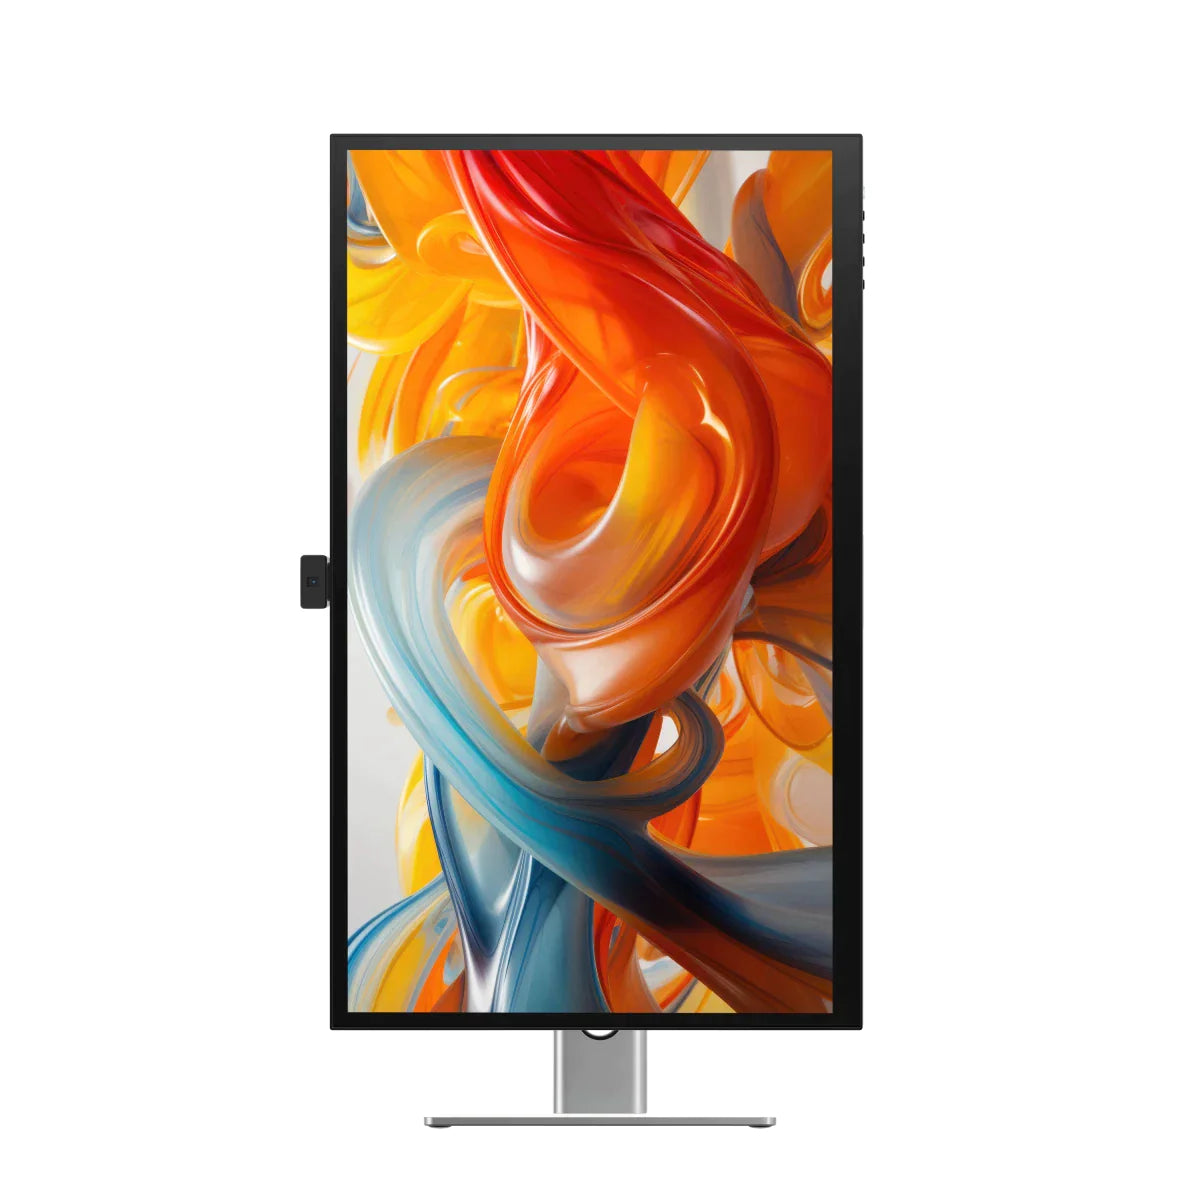 CLARITY 27" UHD 4K Monitor + Clarity Pro Touch 27" UHD 4K Monitor with 65W PD, Webcam and Touchscreen + Dual 4K Universal Docking Station DisplayPort Edition